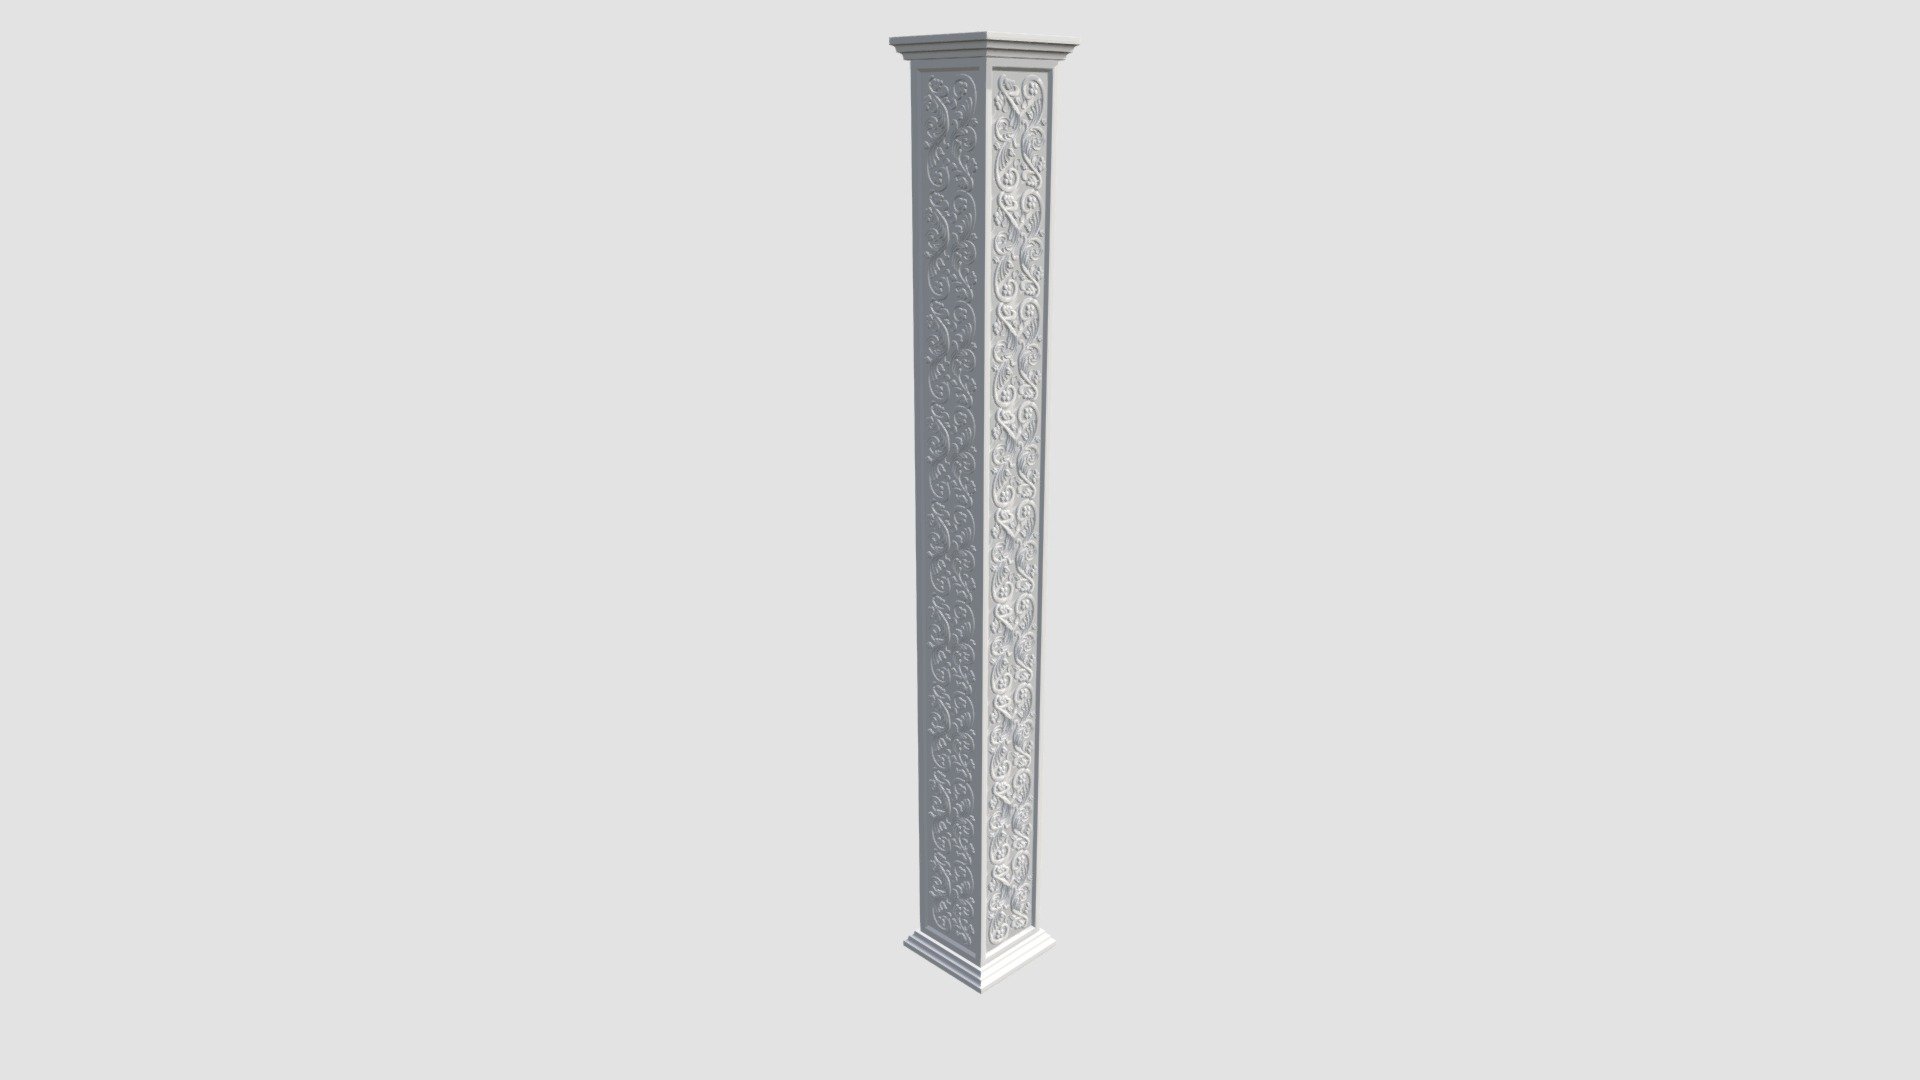 Highly detailed architecture ornament with all textures and materials 3d model